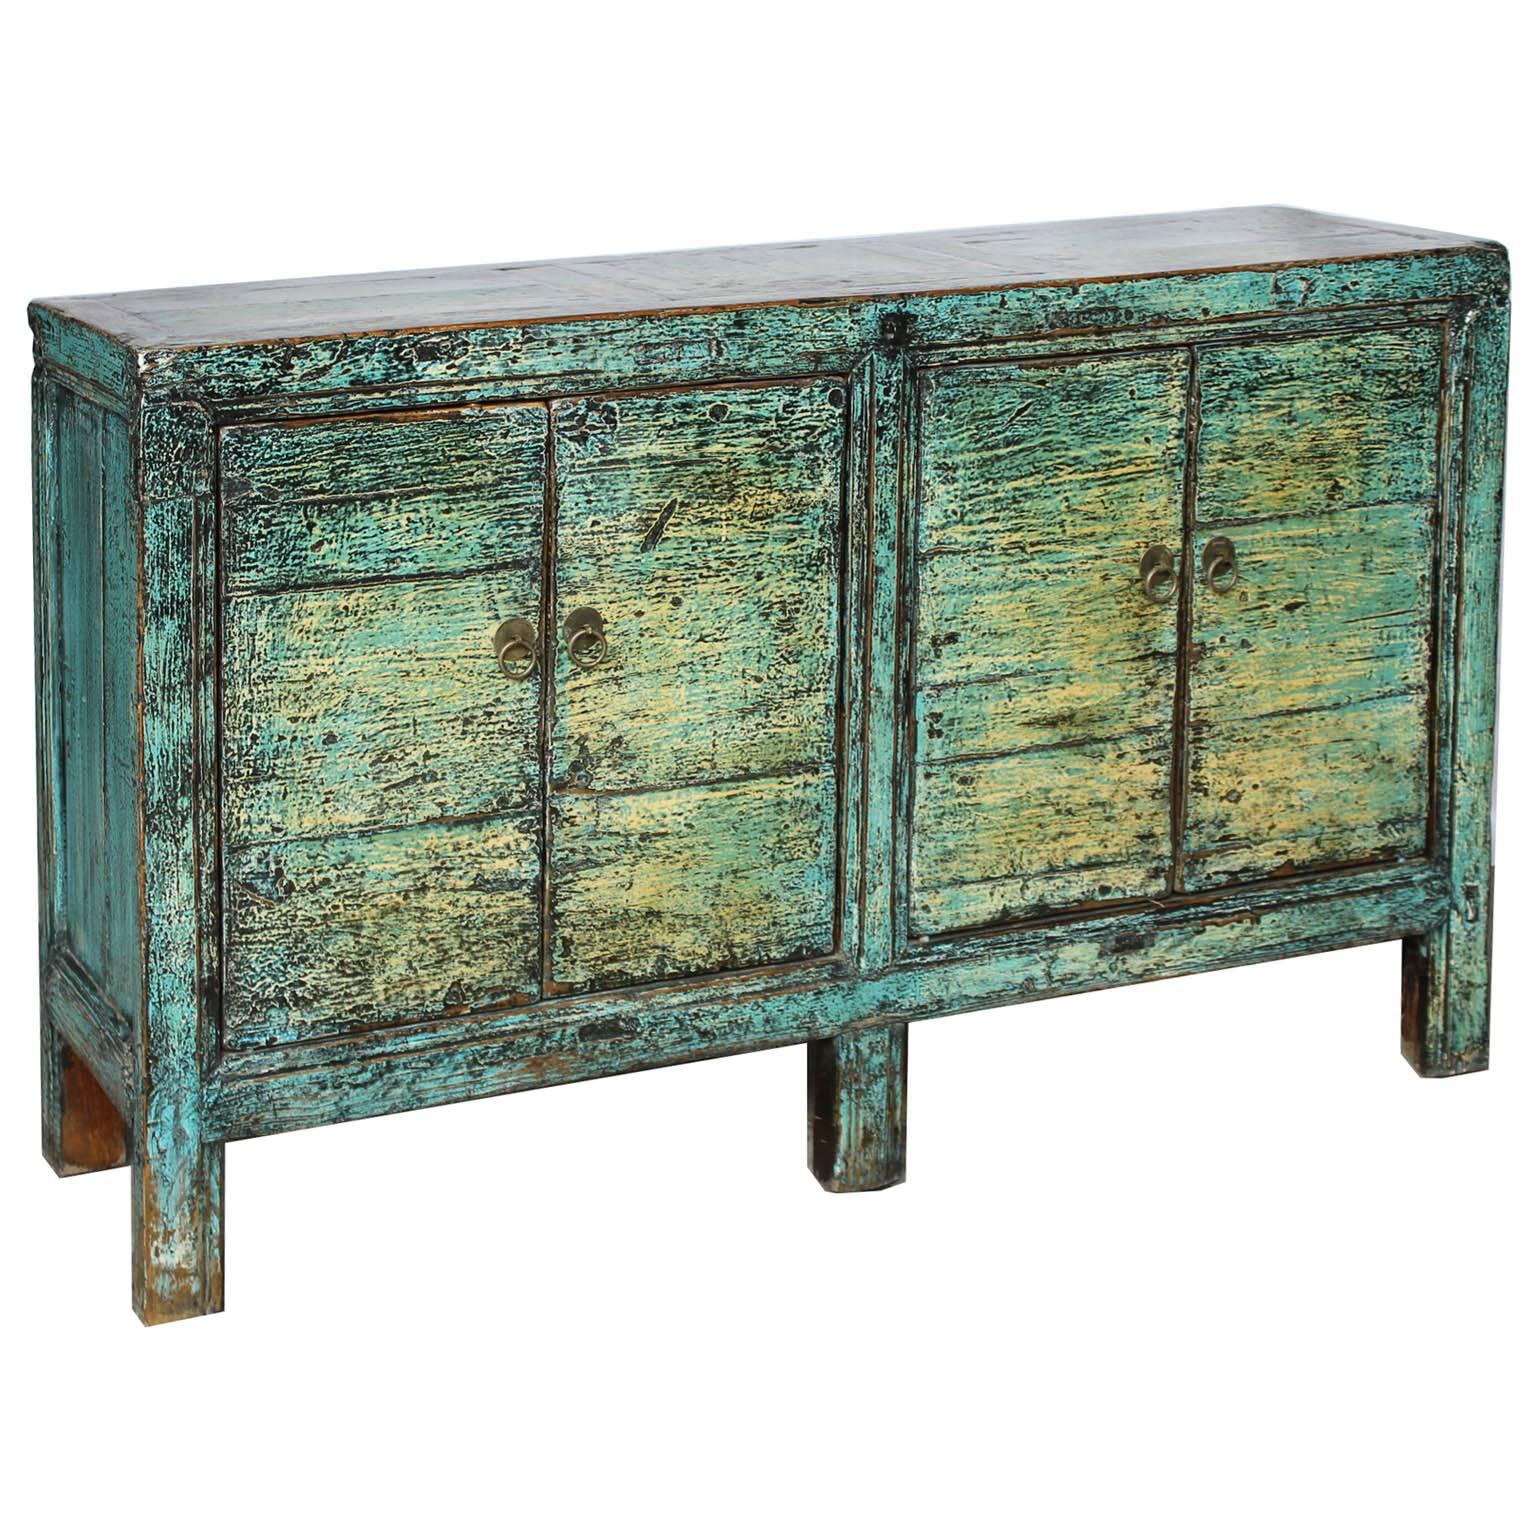 Hand-painted blueish green lacquer sideboard with four doors with exposed wood edges. New interior shelf and hardware, China, circa 1900s.